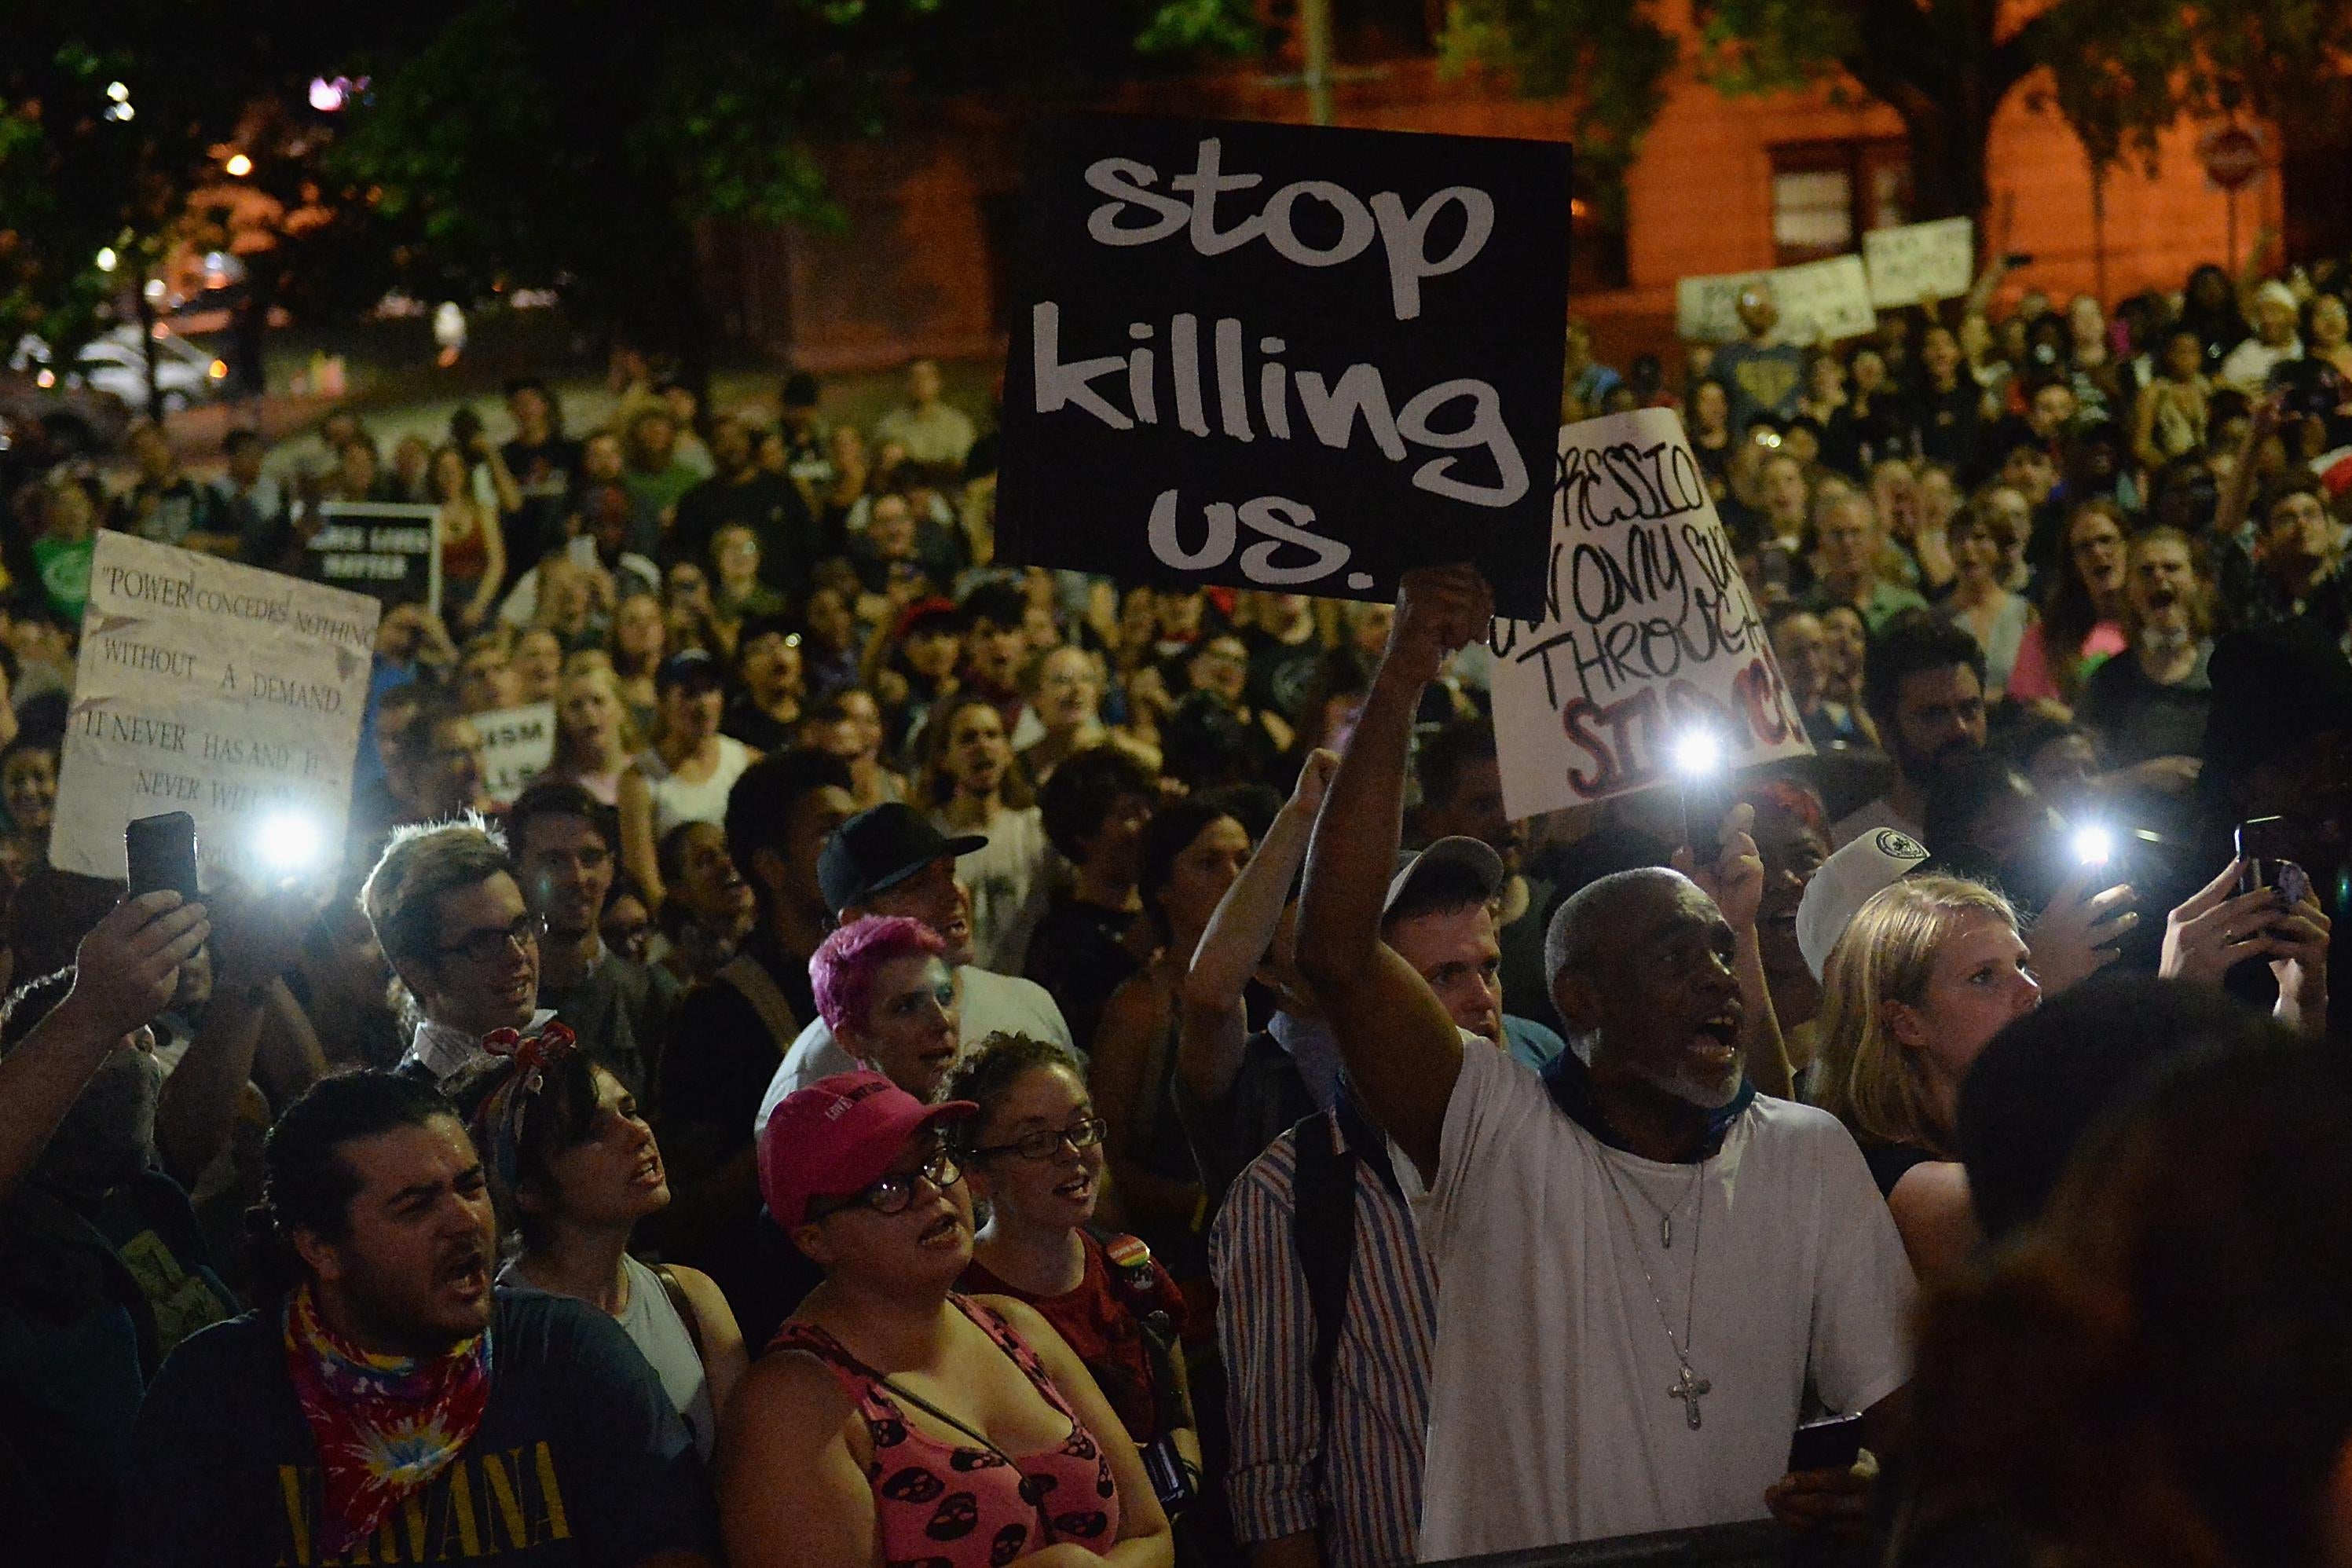 A few people hold lights from their cell phones at a night-time protest. A man in a white tee shirt at the front holds a sign that says, "stop killing us."